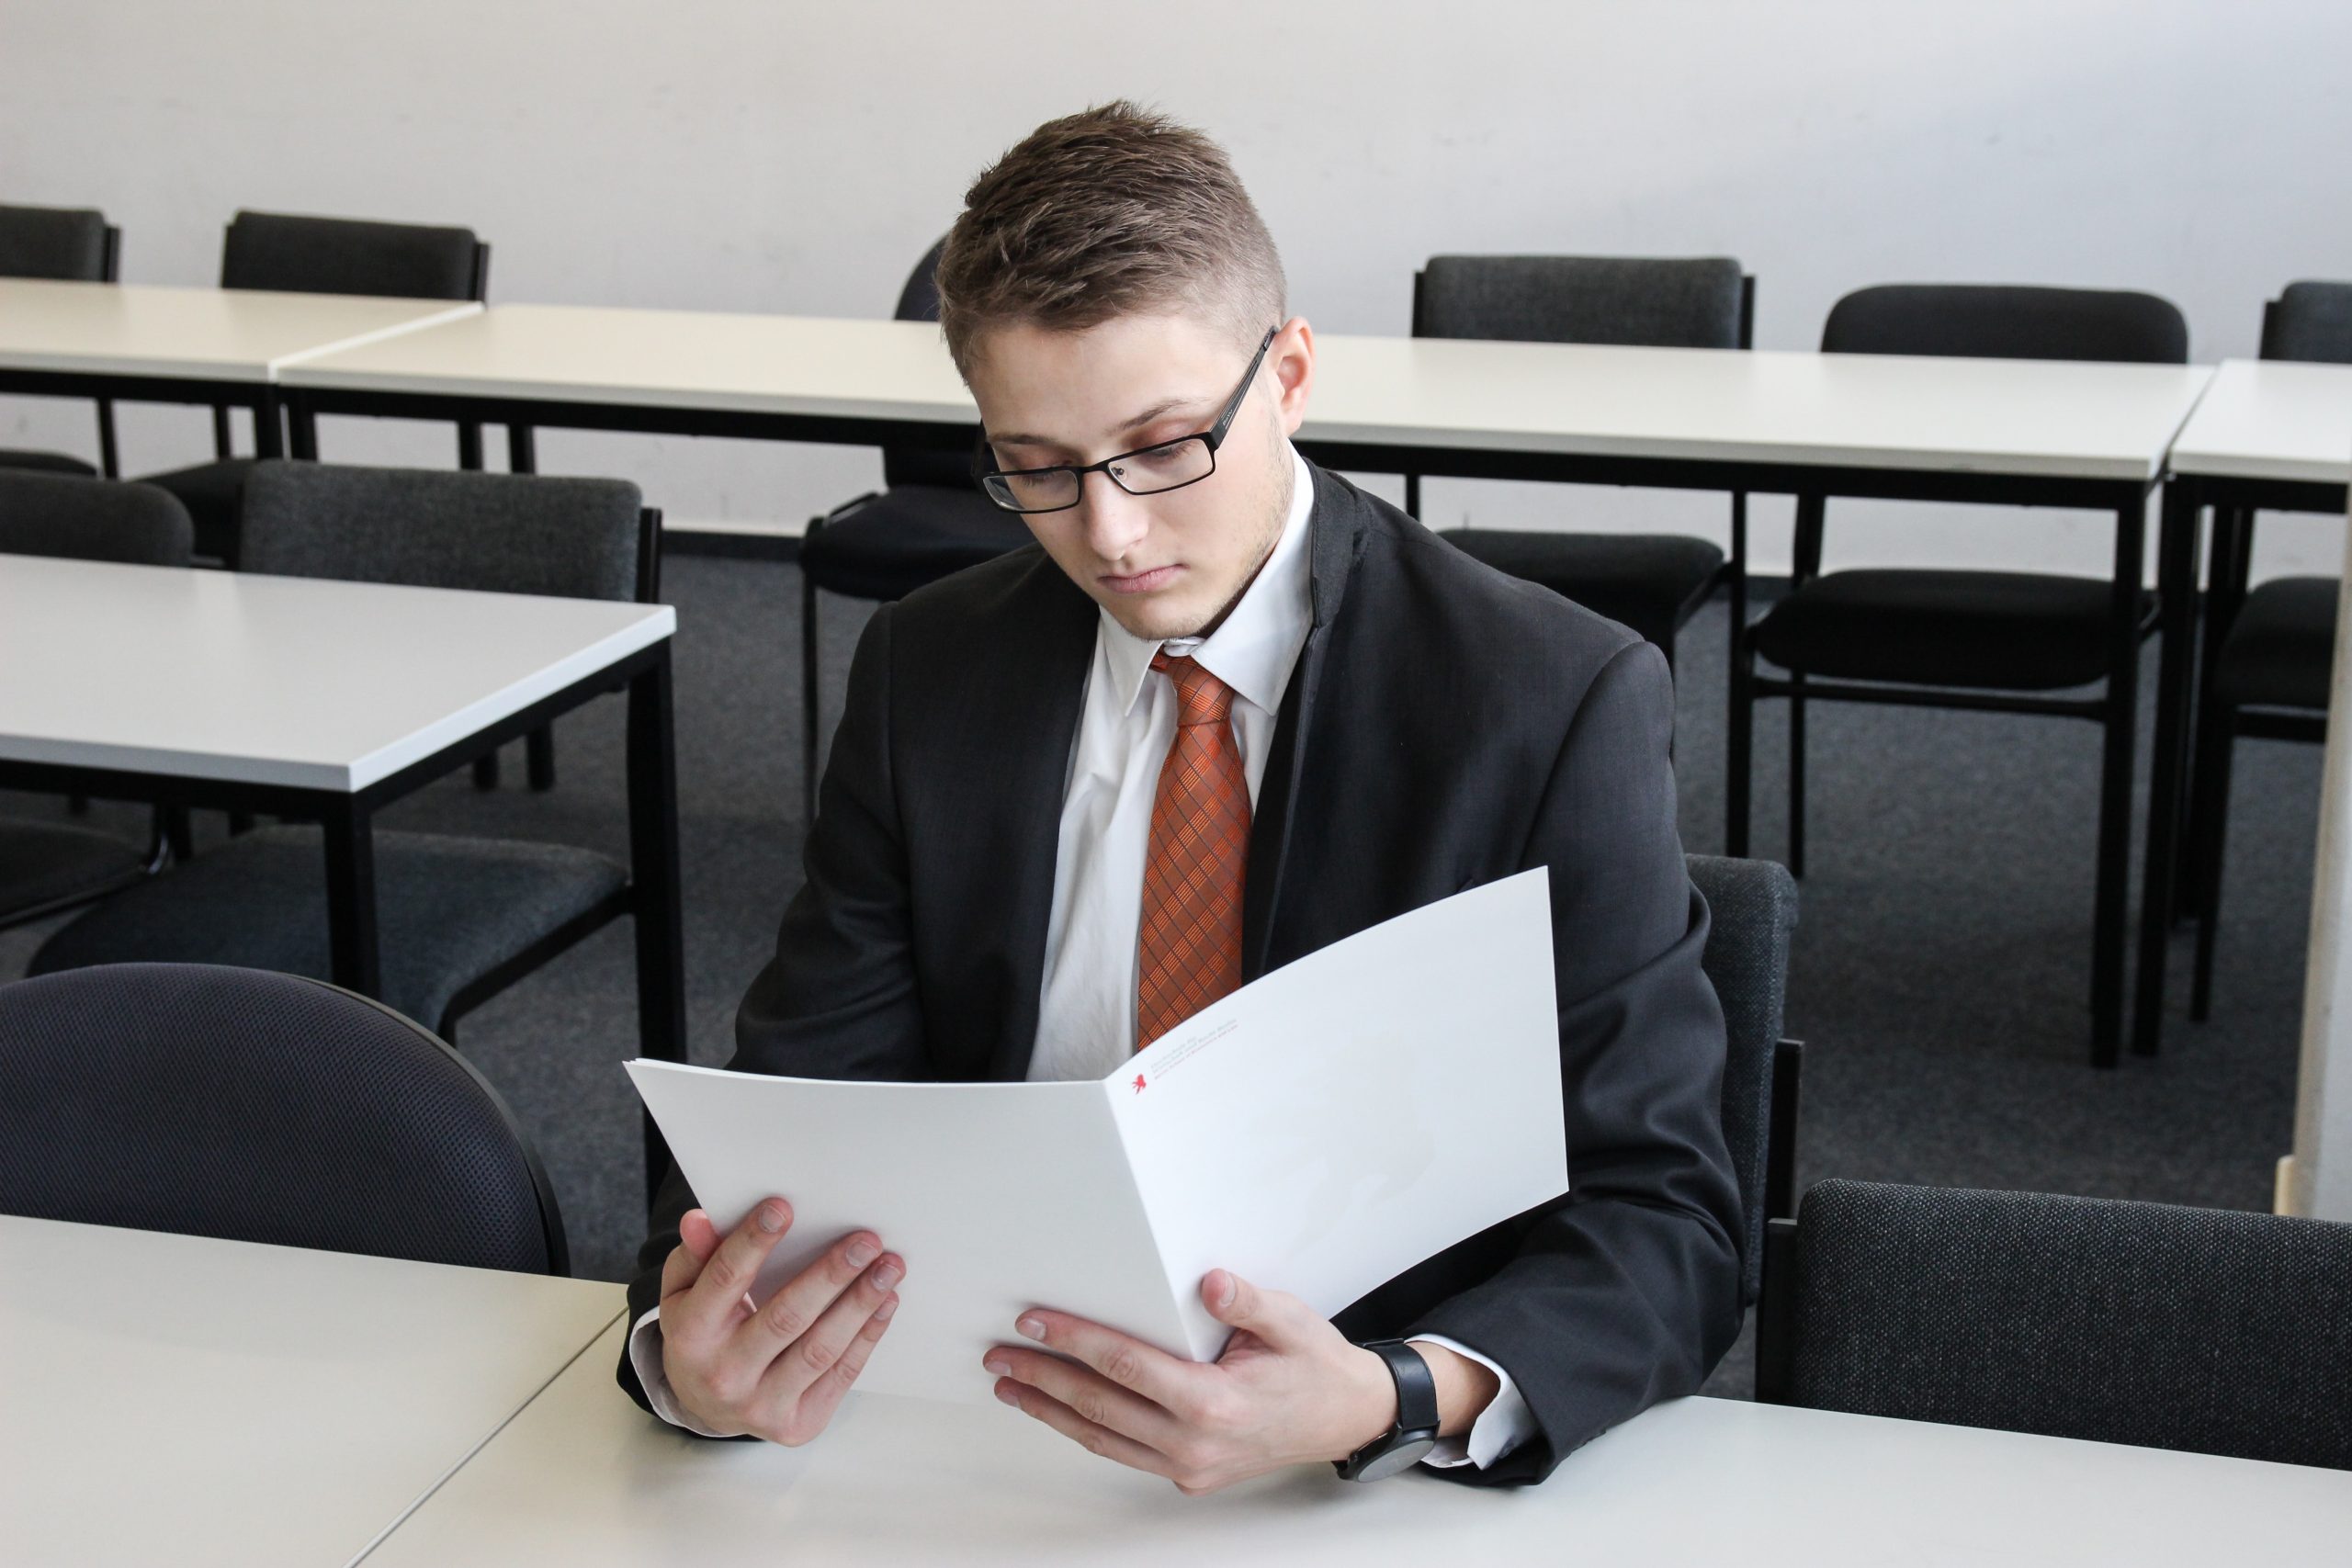 Why Use Quizzes for Job Interviews and Recruitment?